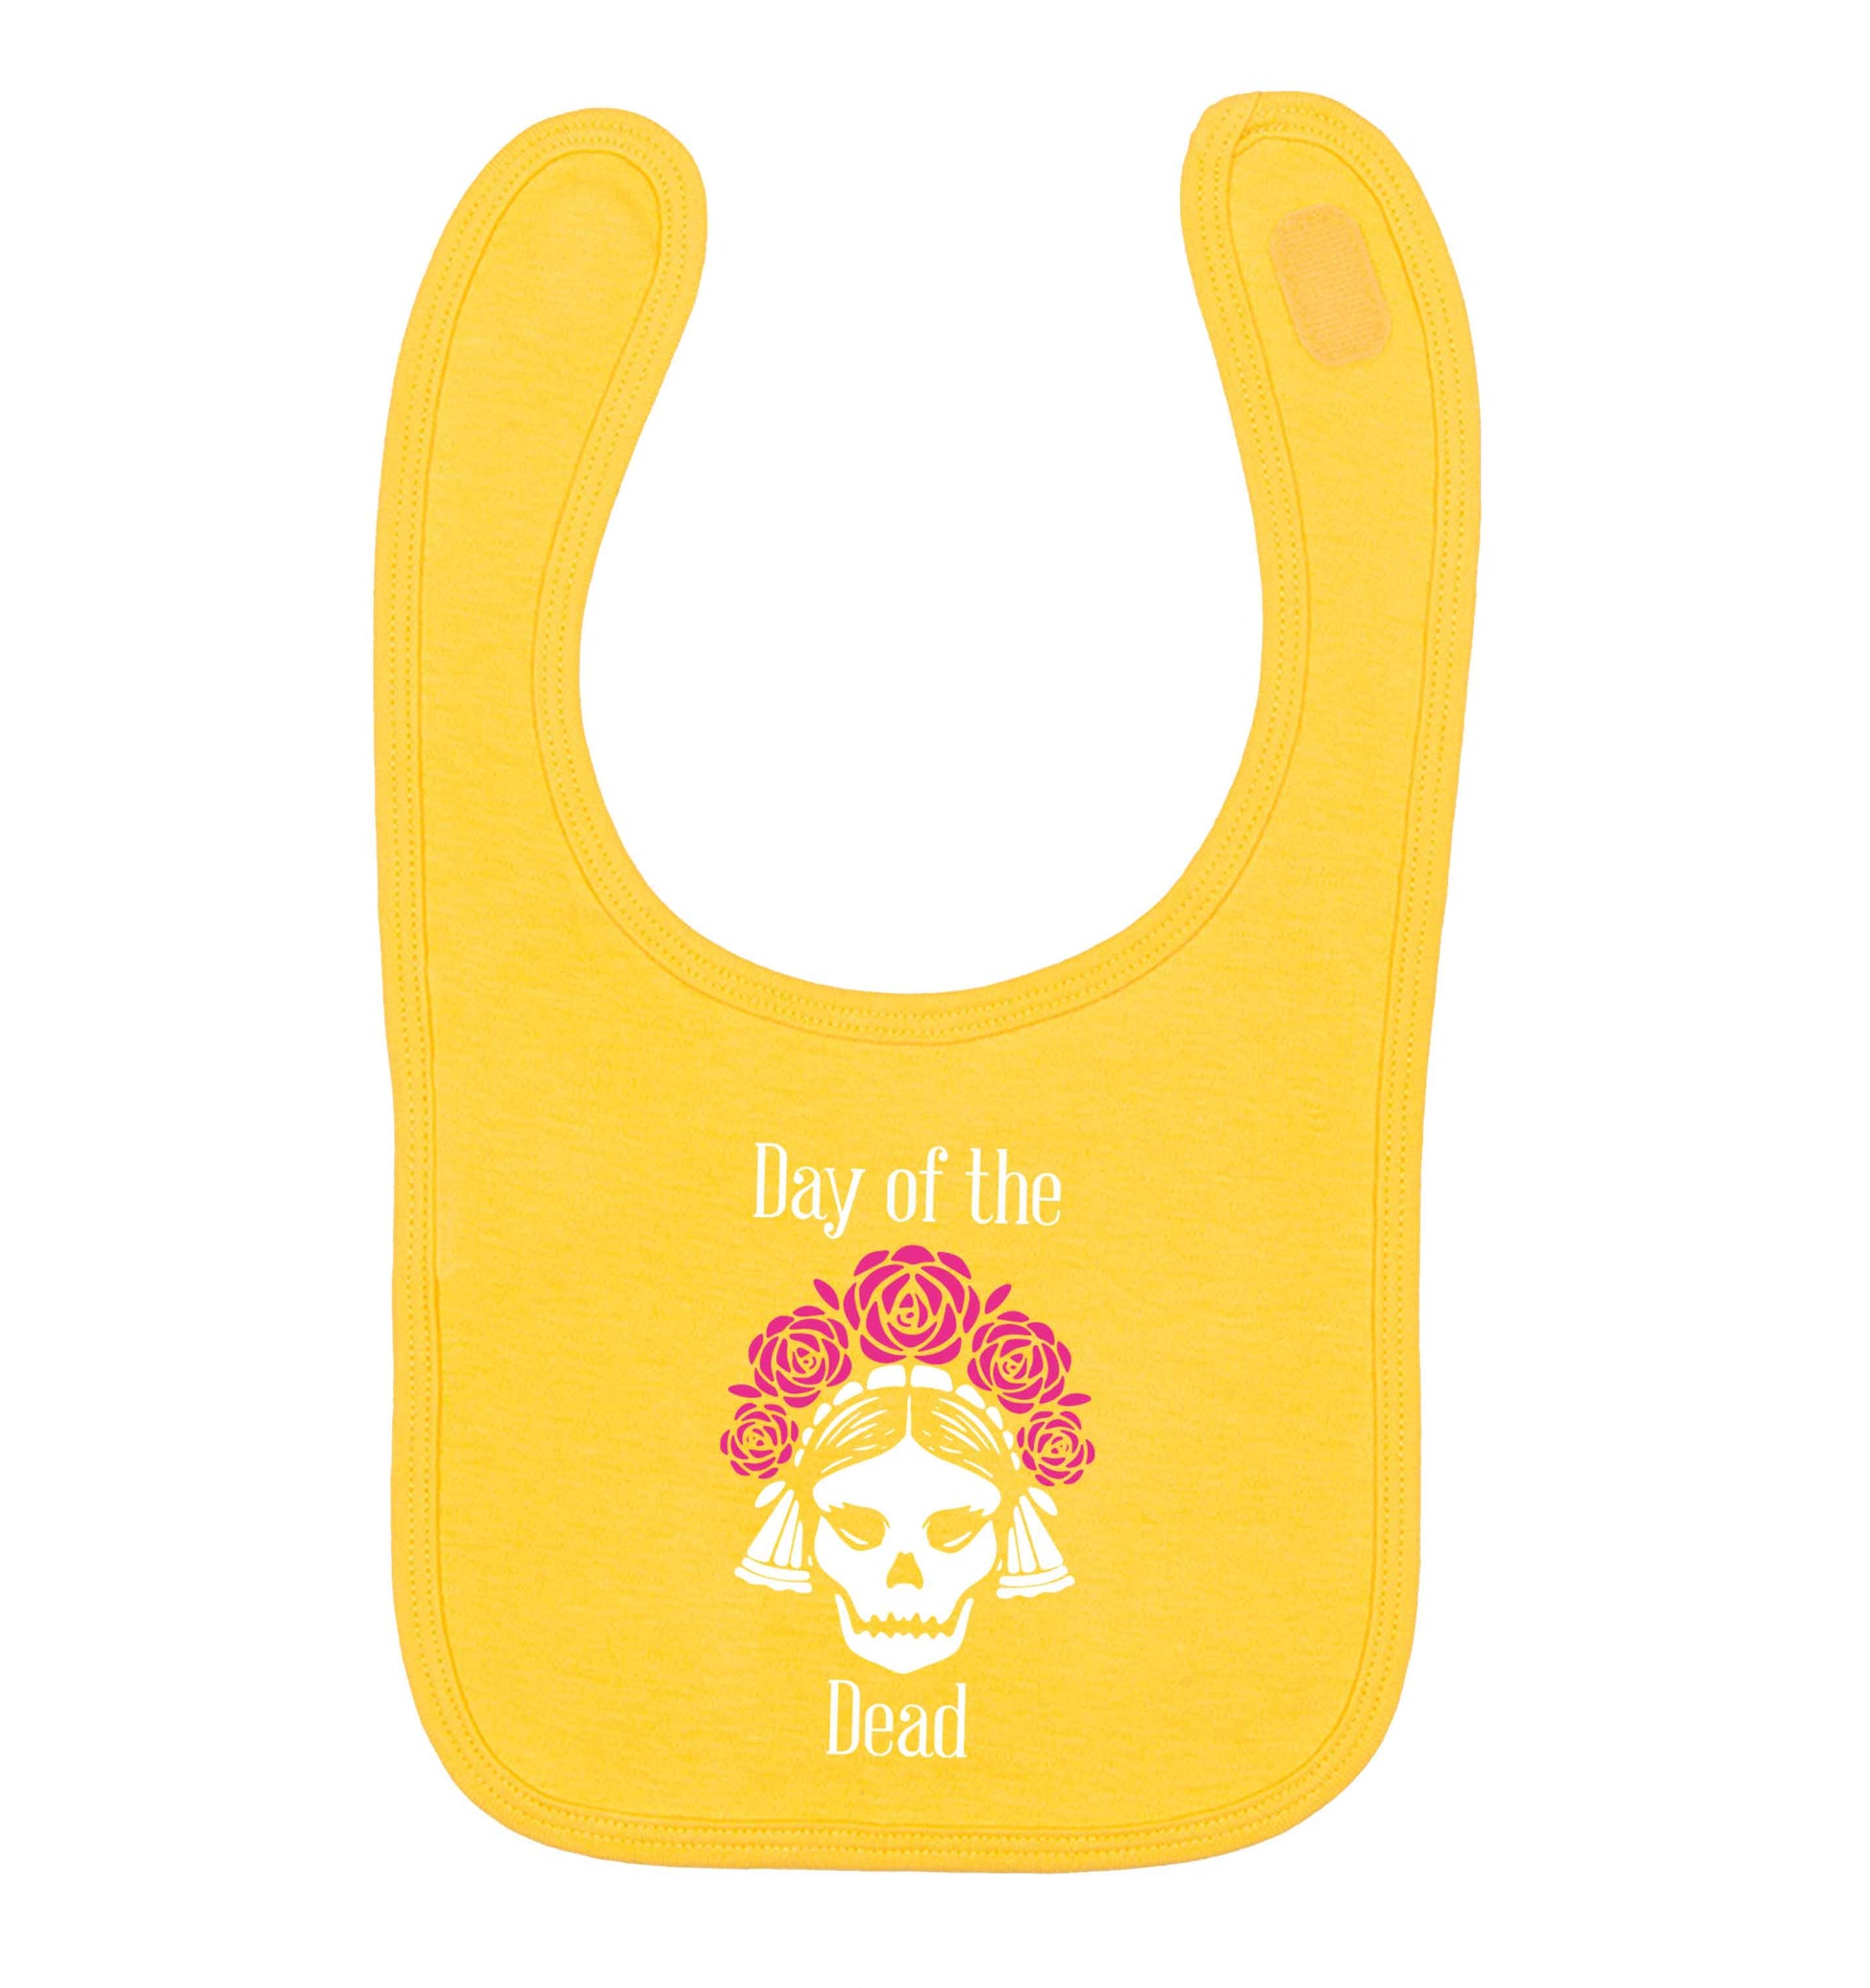 Day of the dead yellow baby bib